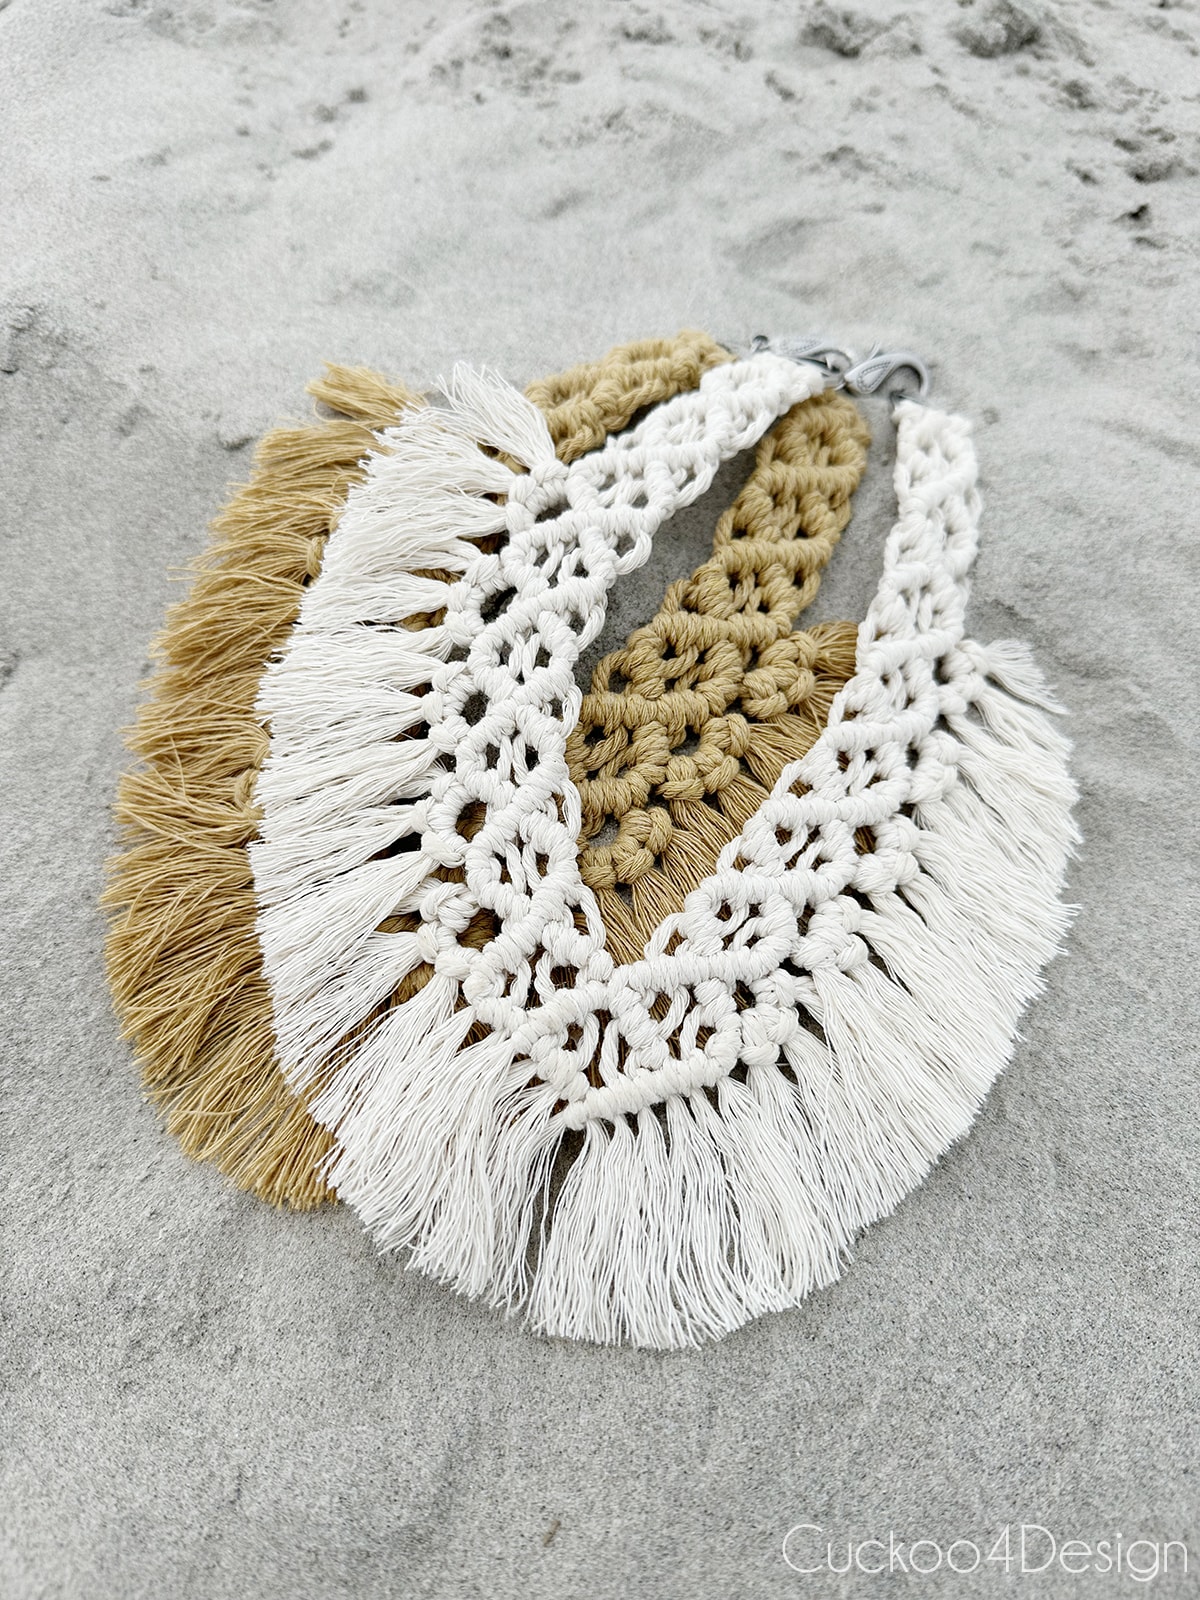 tan and ivory macrame necklace laying in the sand